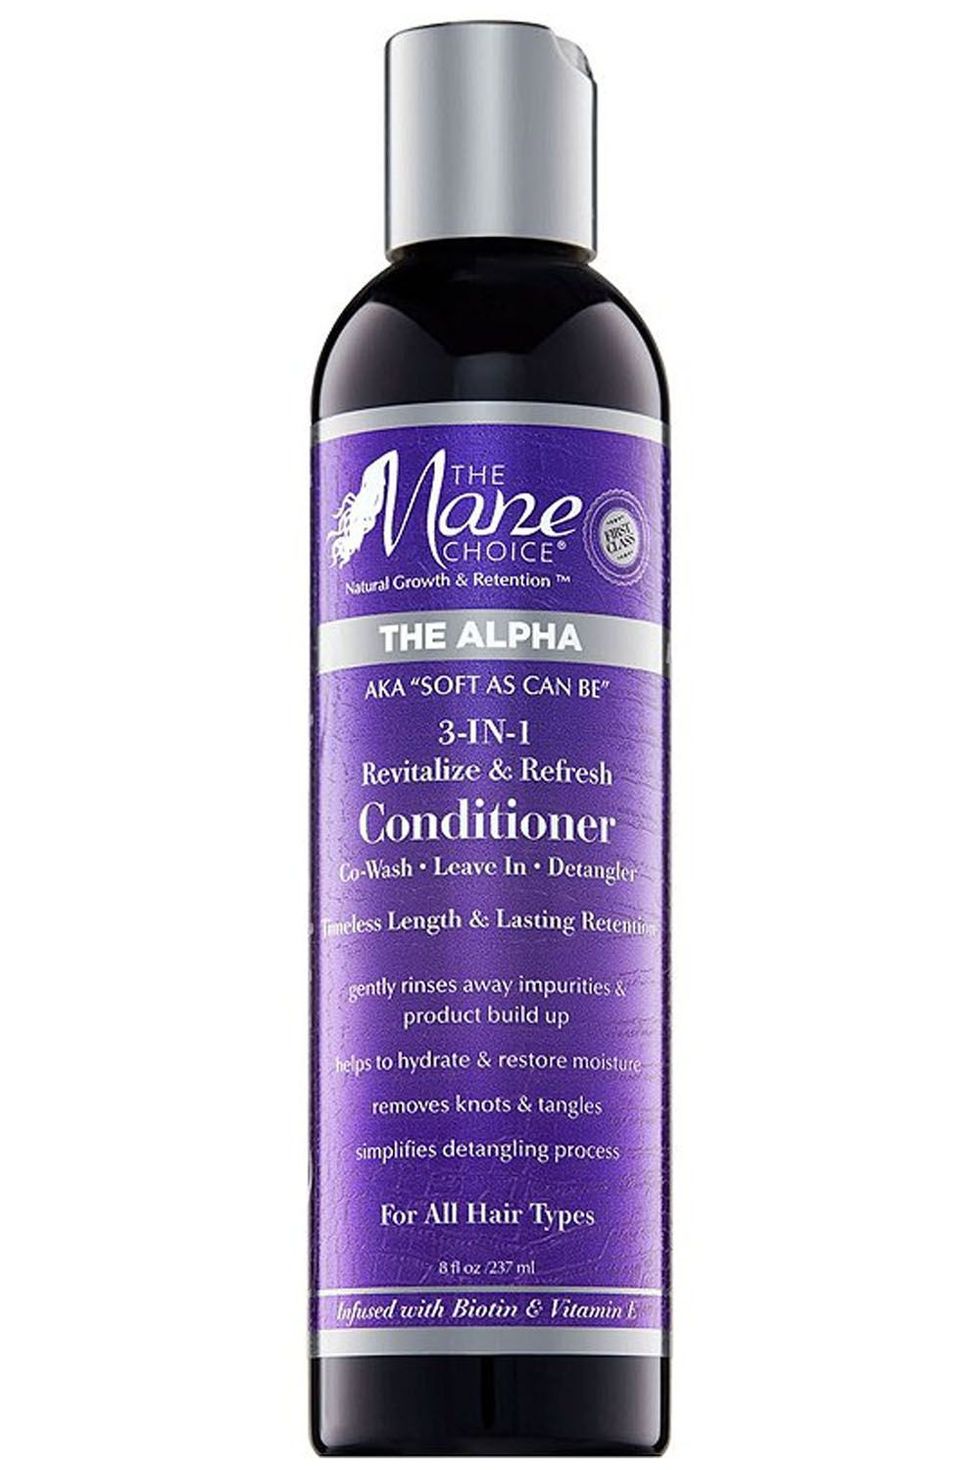 15 Best Leave-In Conditioners for Natural Hair in 2022